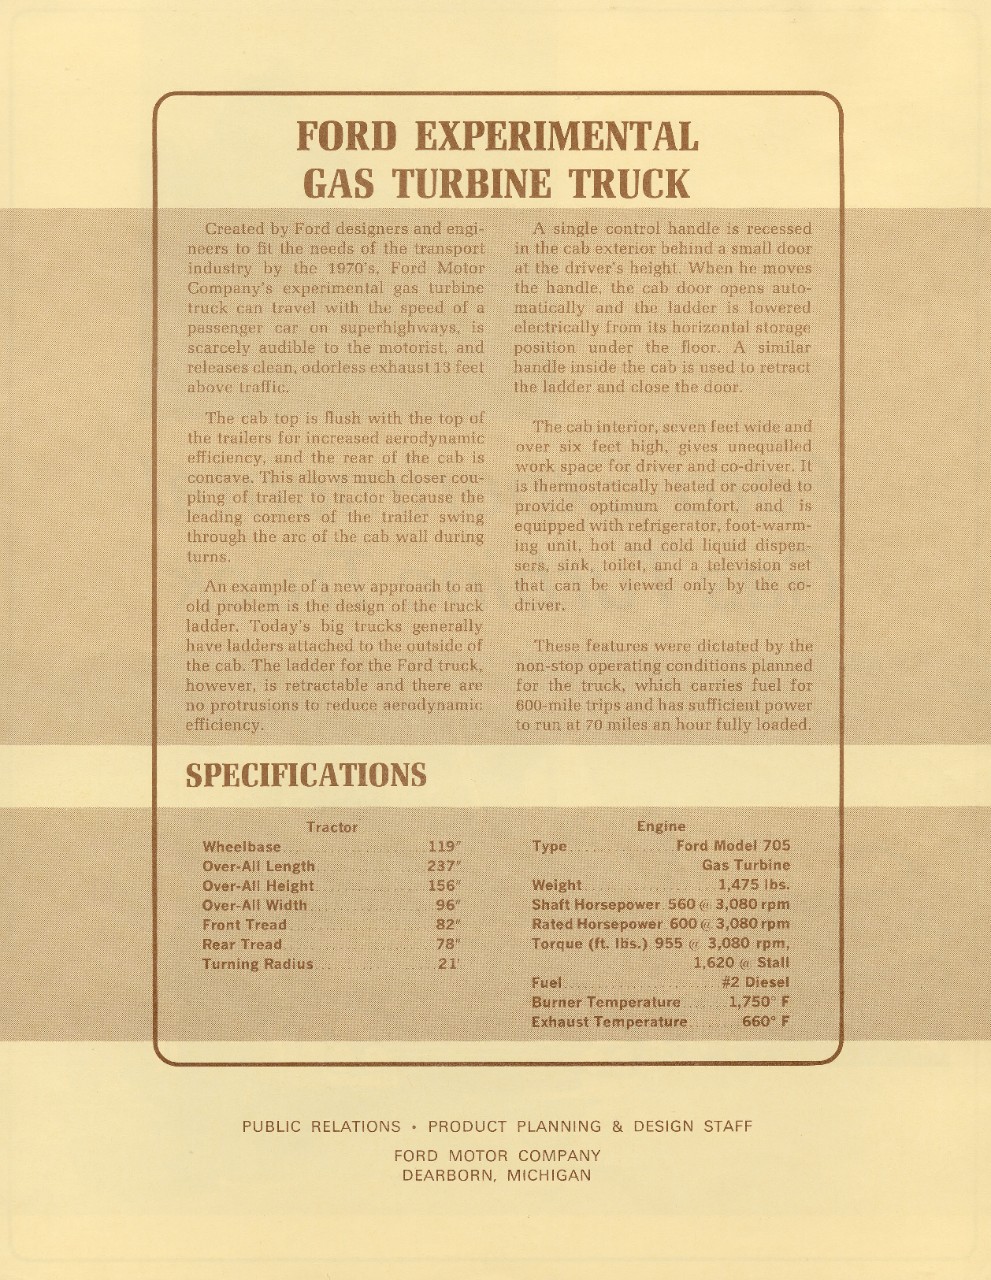 Brochure for the 1964 Ford Big Red Gas Turbine Truck